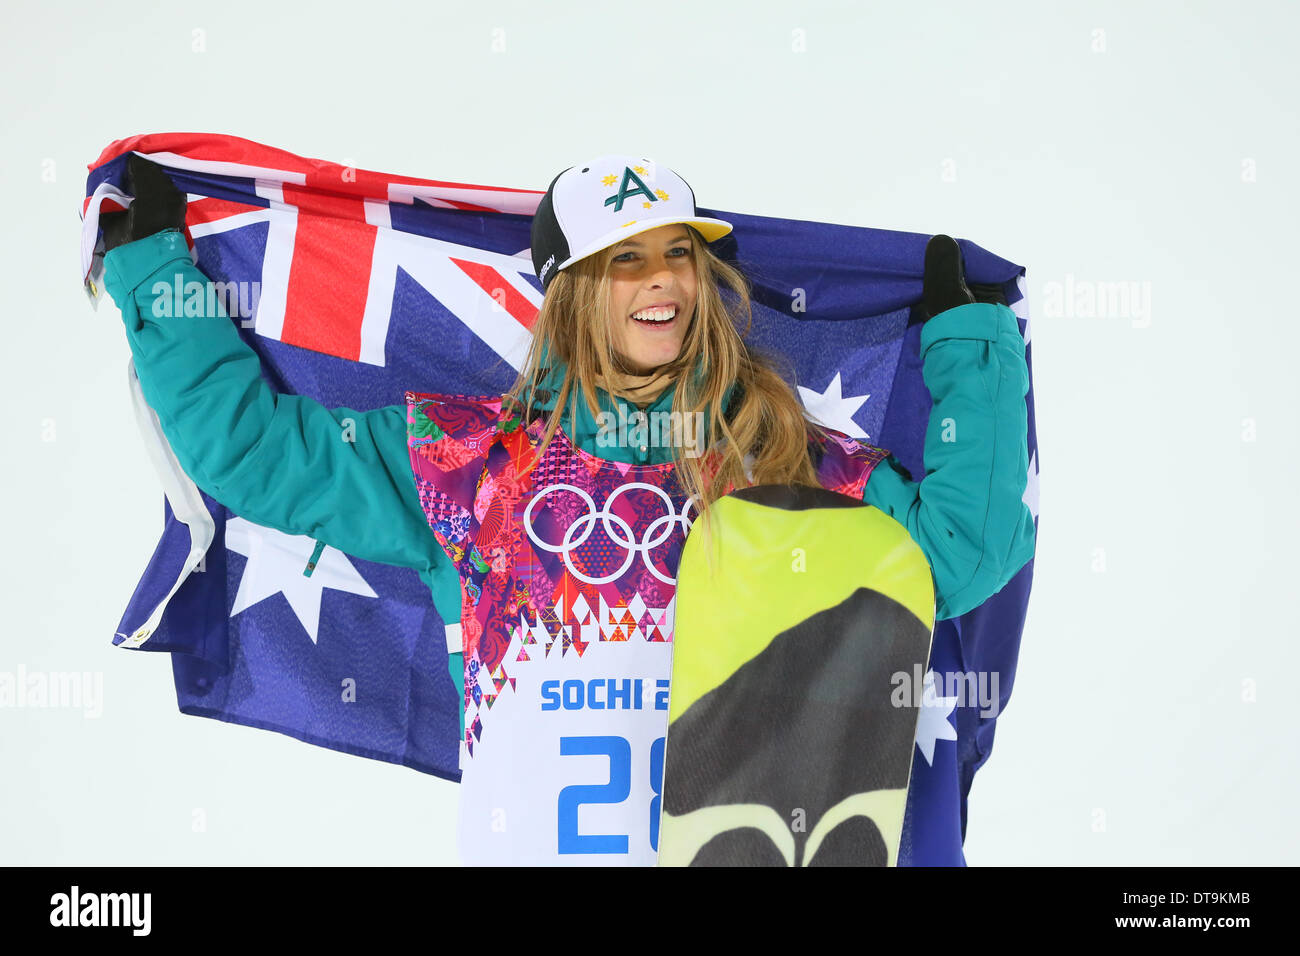 Torah Bright (AUS) waves the Australian flag as she celebrates winning the silver medal in the women's halfpipe at the Sochi 2014 Winter Olympic Games. (Photo Yutaka/AFLO) Stock Photo